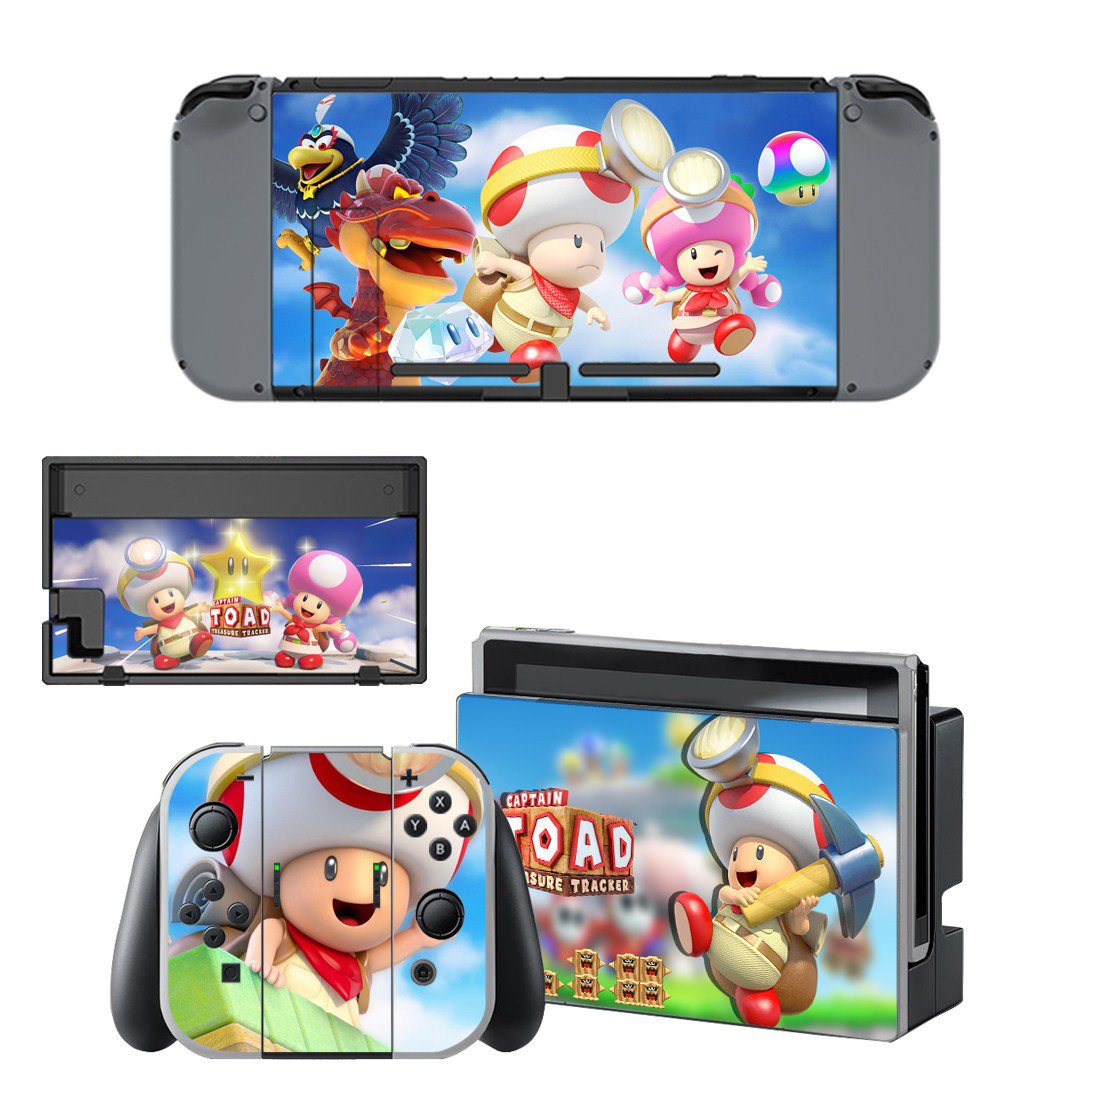 toad switch download